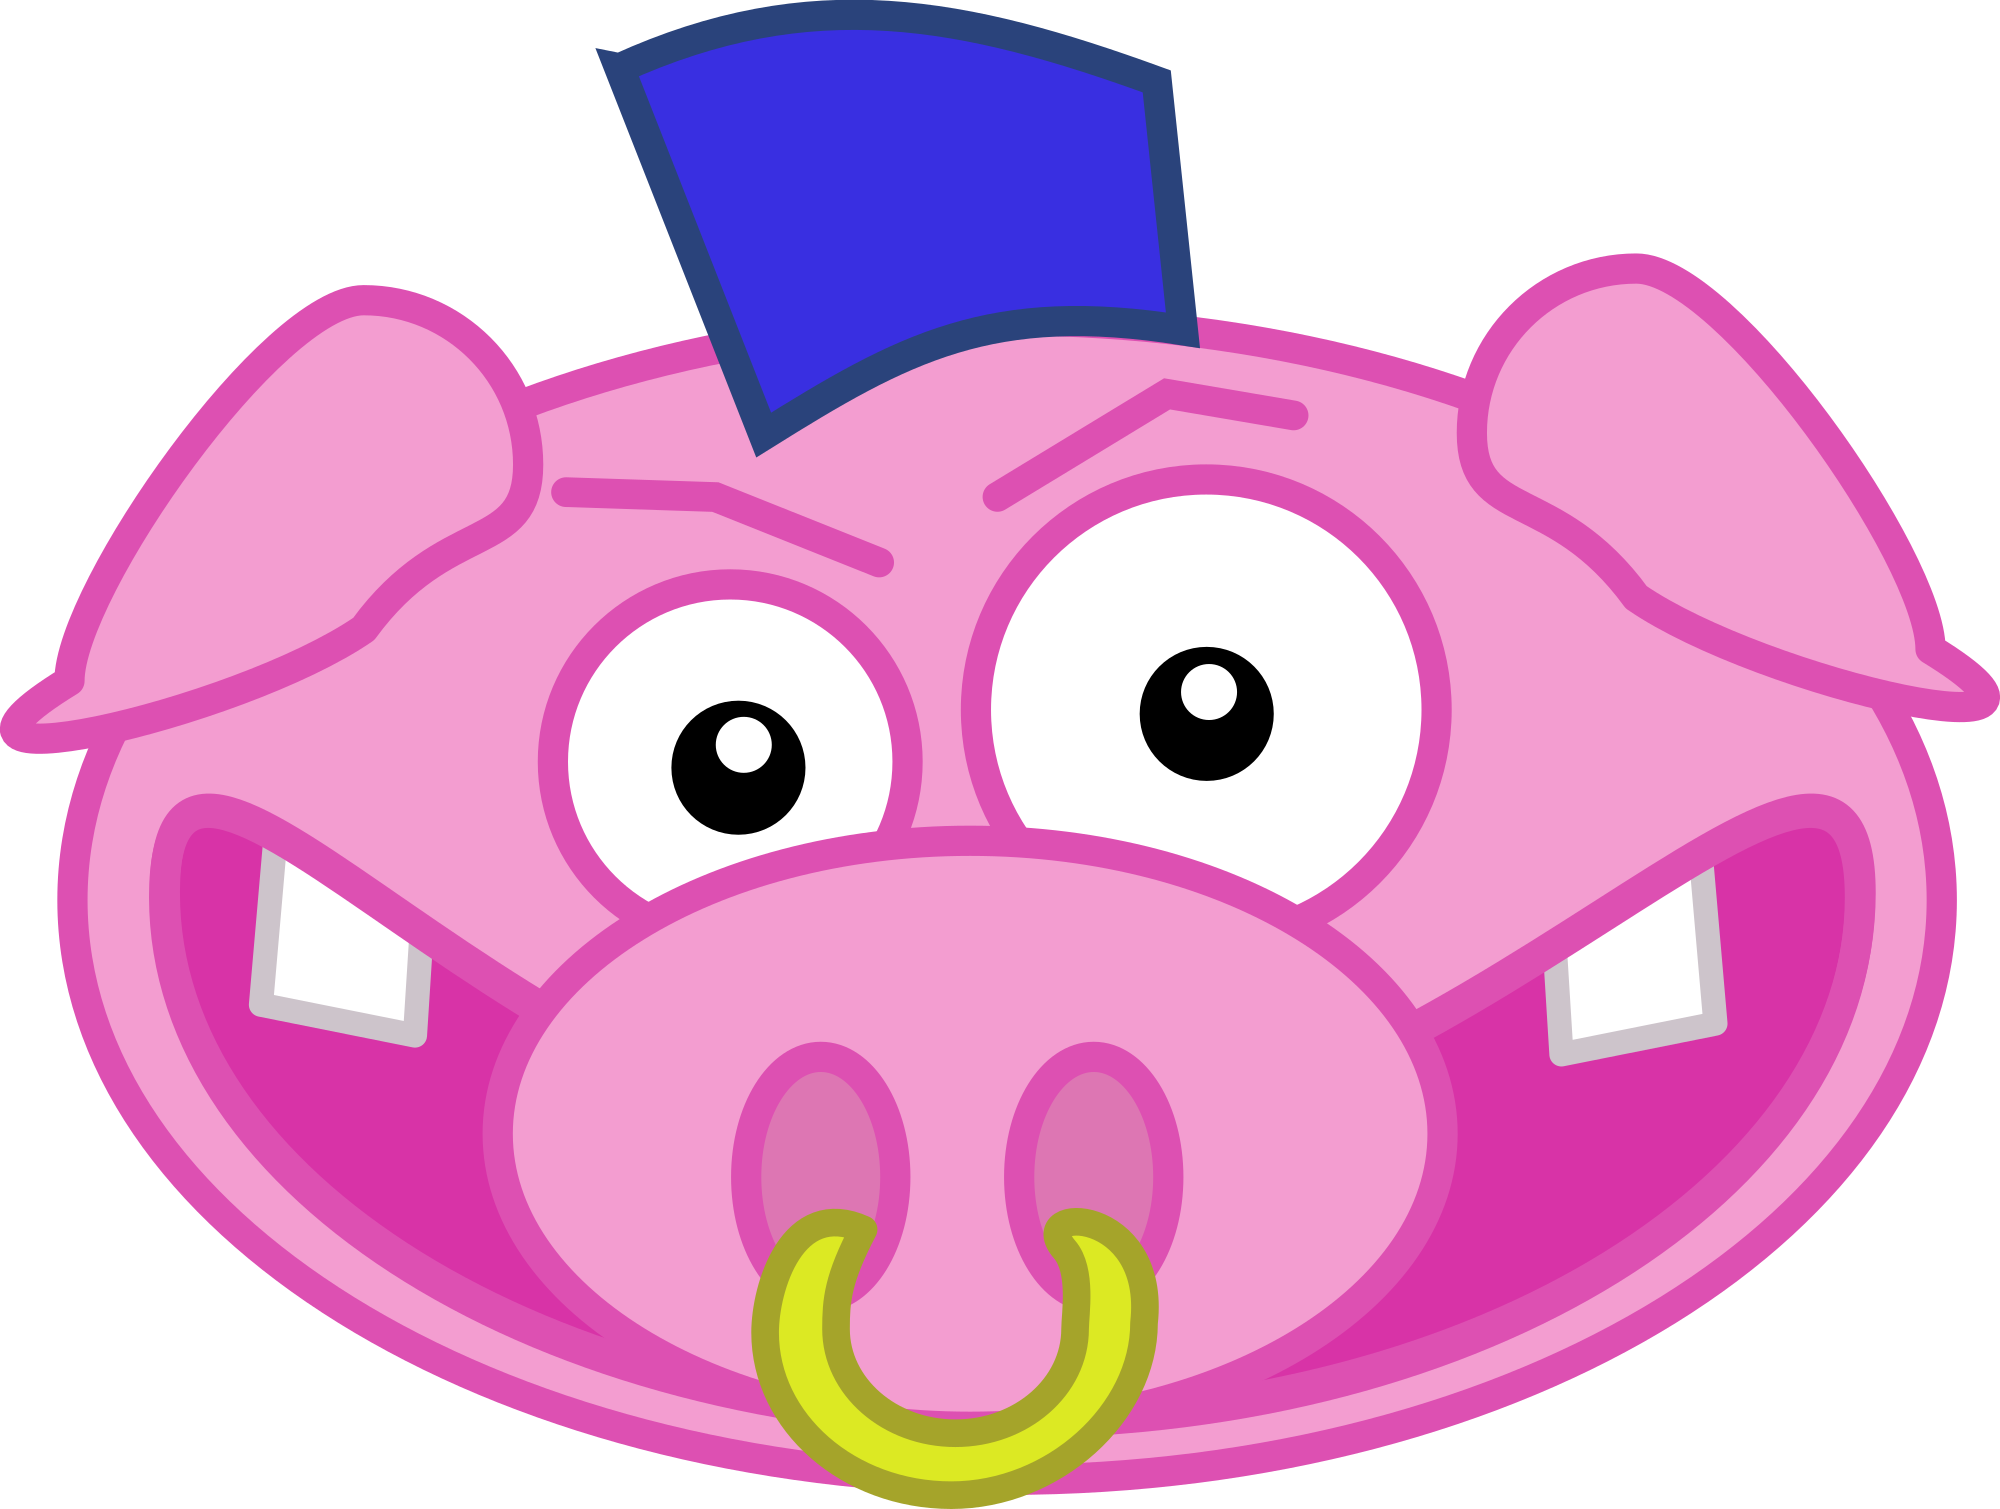 free vector pig clipart - photo #31